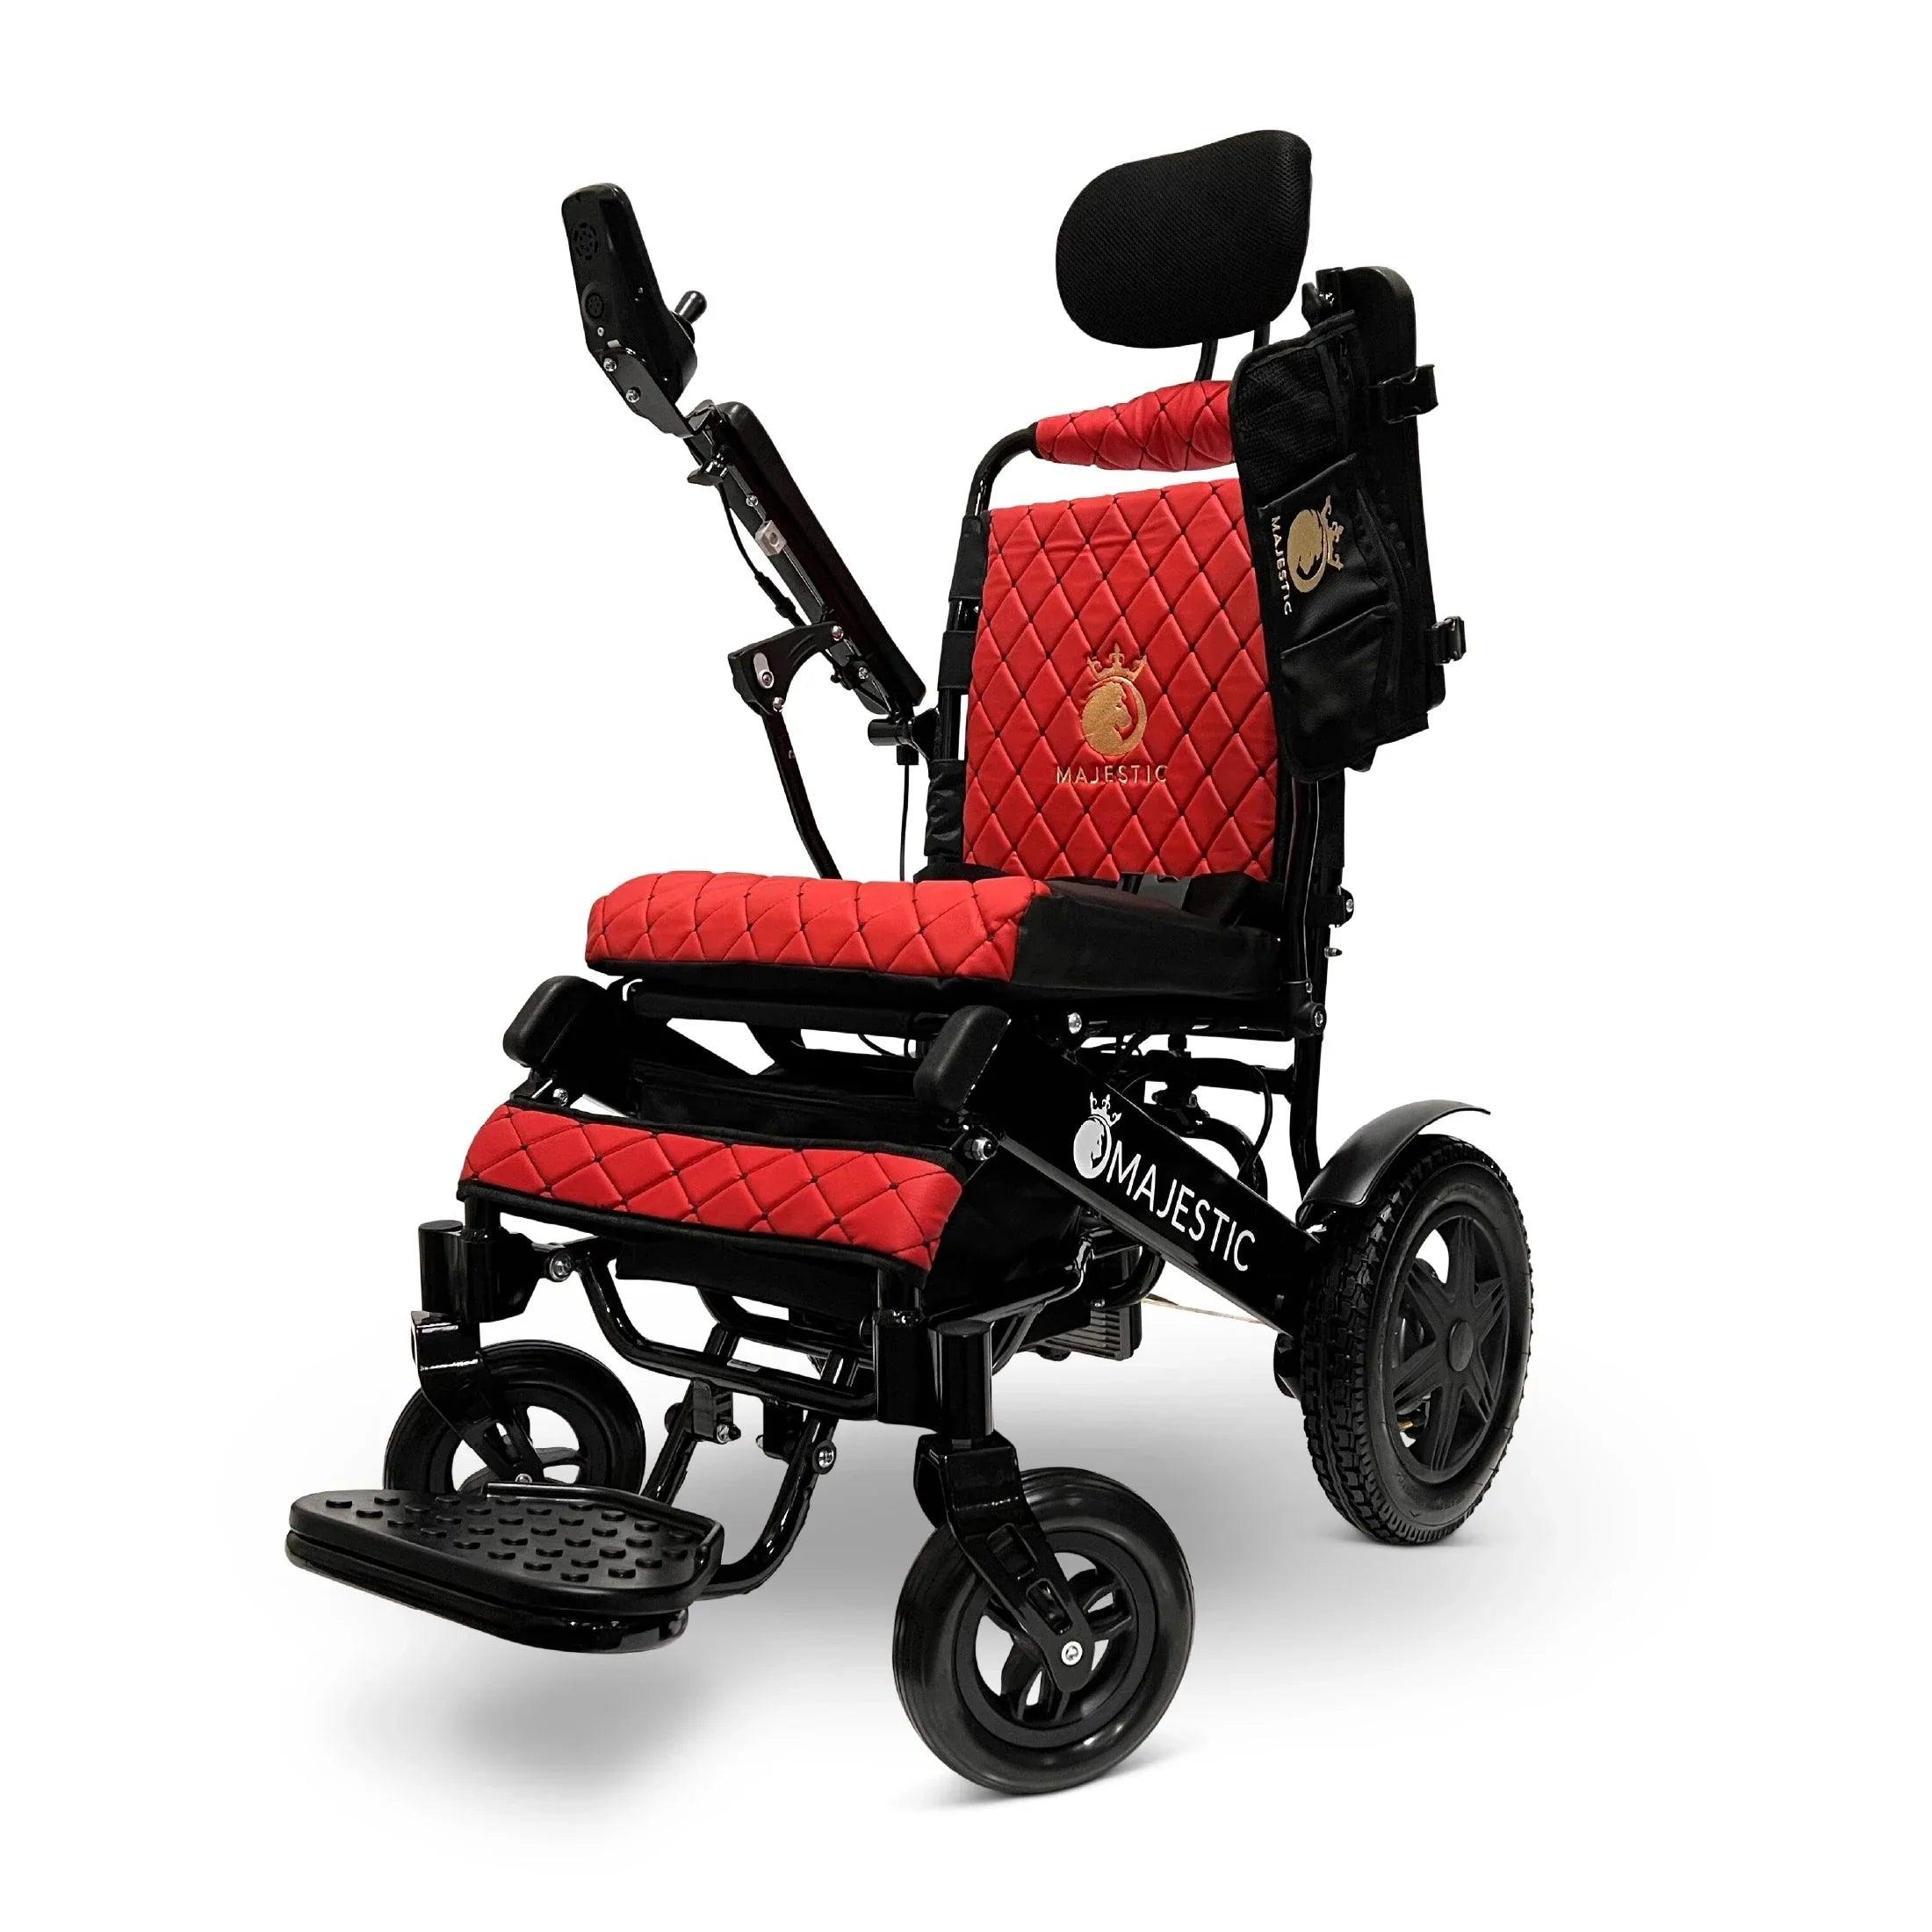 MAJESTIC IQ-9000 Long Range Electric Wheelchair With Auto Recline ComfyGo